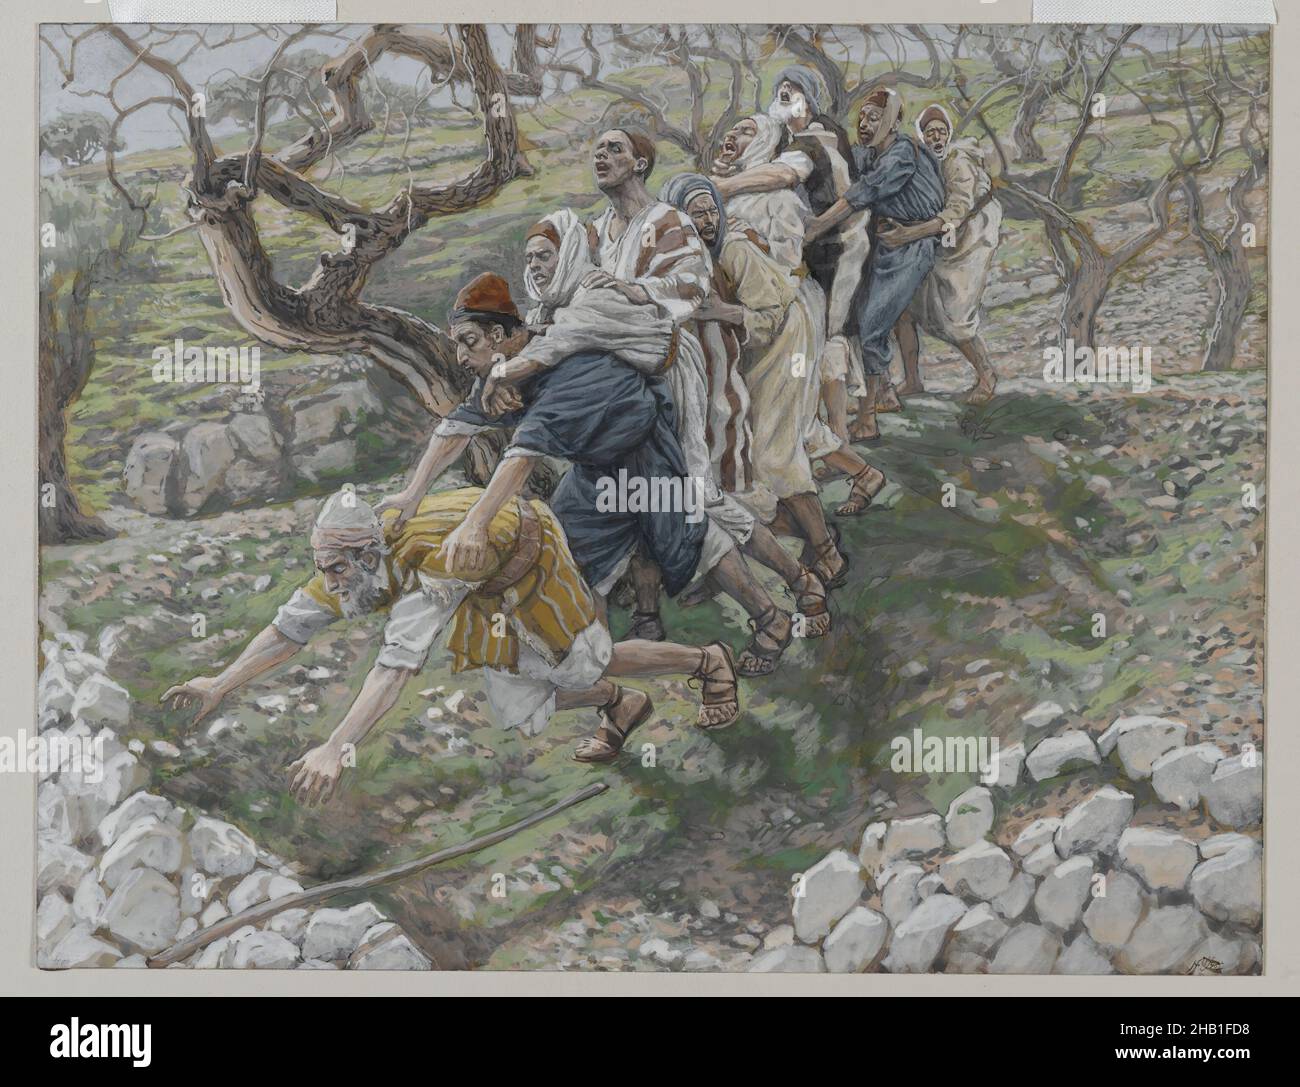 The Blind in the Ditch, Les aveugles dans le fossé, The Life of Our Lord Jesus Christ, La Vie de Notre-Seigneur Jésus-Christ, James Tissot, French, 1836-1902, Opaque watercolor over graphite on gray wove paper, France, 1886-1894, Image: 7 5/8 x 9 7/8 in., 19.4 x 25.1 cm, Bible, Bible story, blind, blind-leading-the-blind, Christian, ditch, faith, falling, figurative, figures, guerison, handicapped, healing, humiliation, Jerusalem, Jesus, landscape, lion, Matthew 15:14, New testament, perdition, robes, sadals, sight, single file, stone, the fall, the life of Christ, ungodly, watercolor, worship Stock Photo